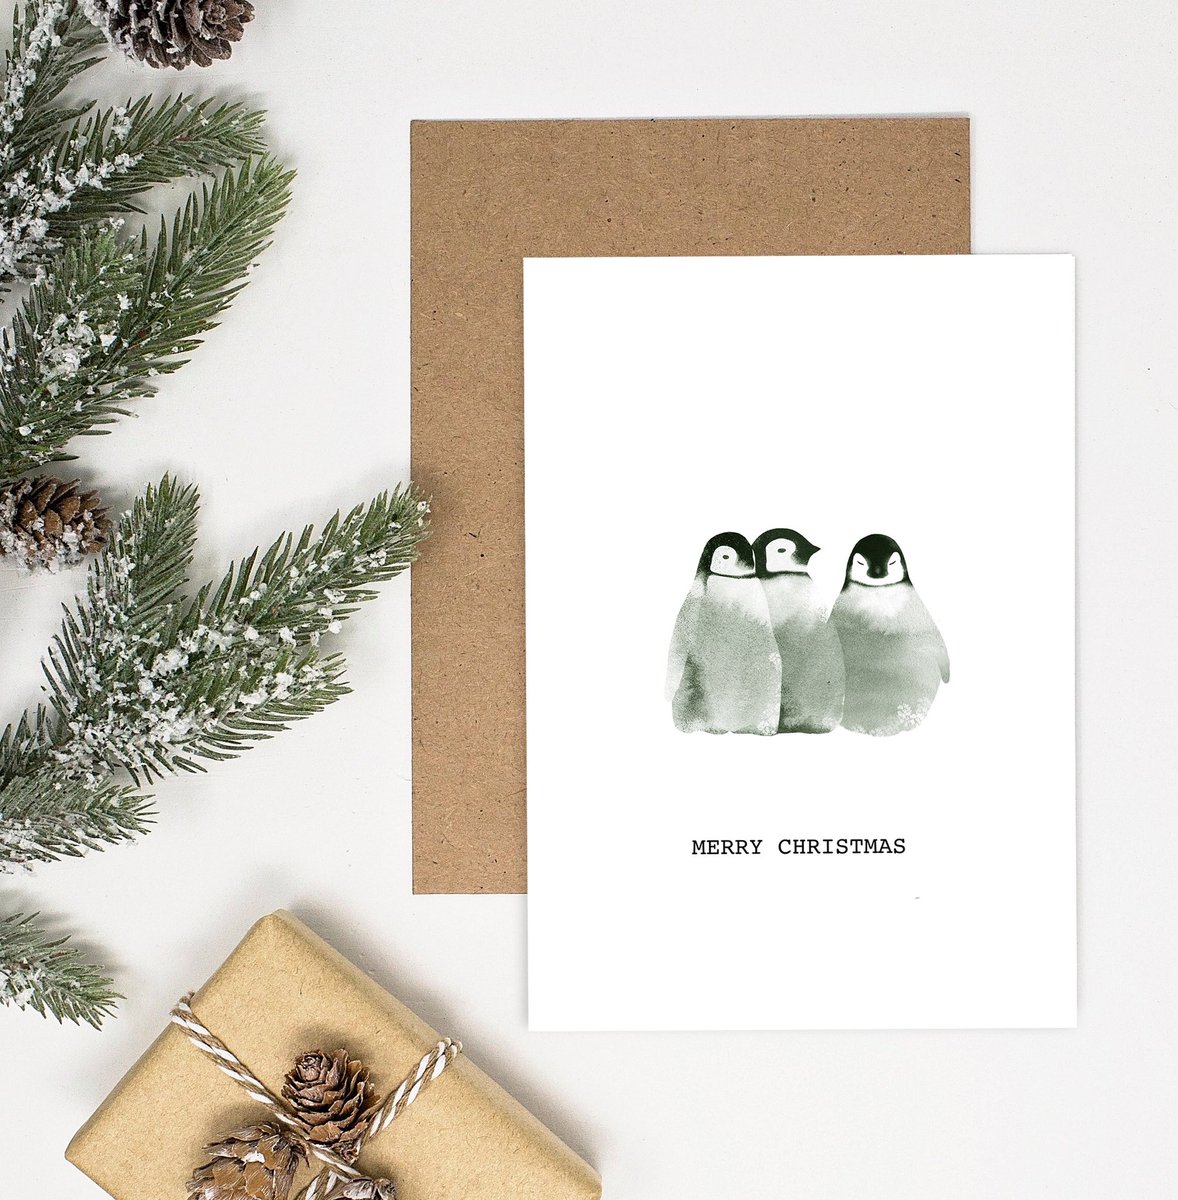 Here’s our new baby #penguin card which is available through our Etsy. #supportlocalBusiness